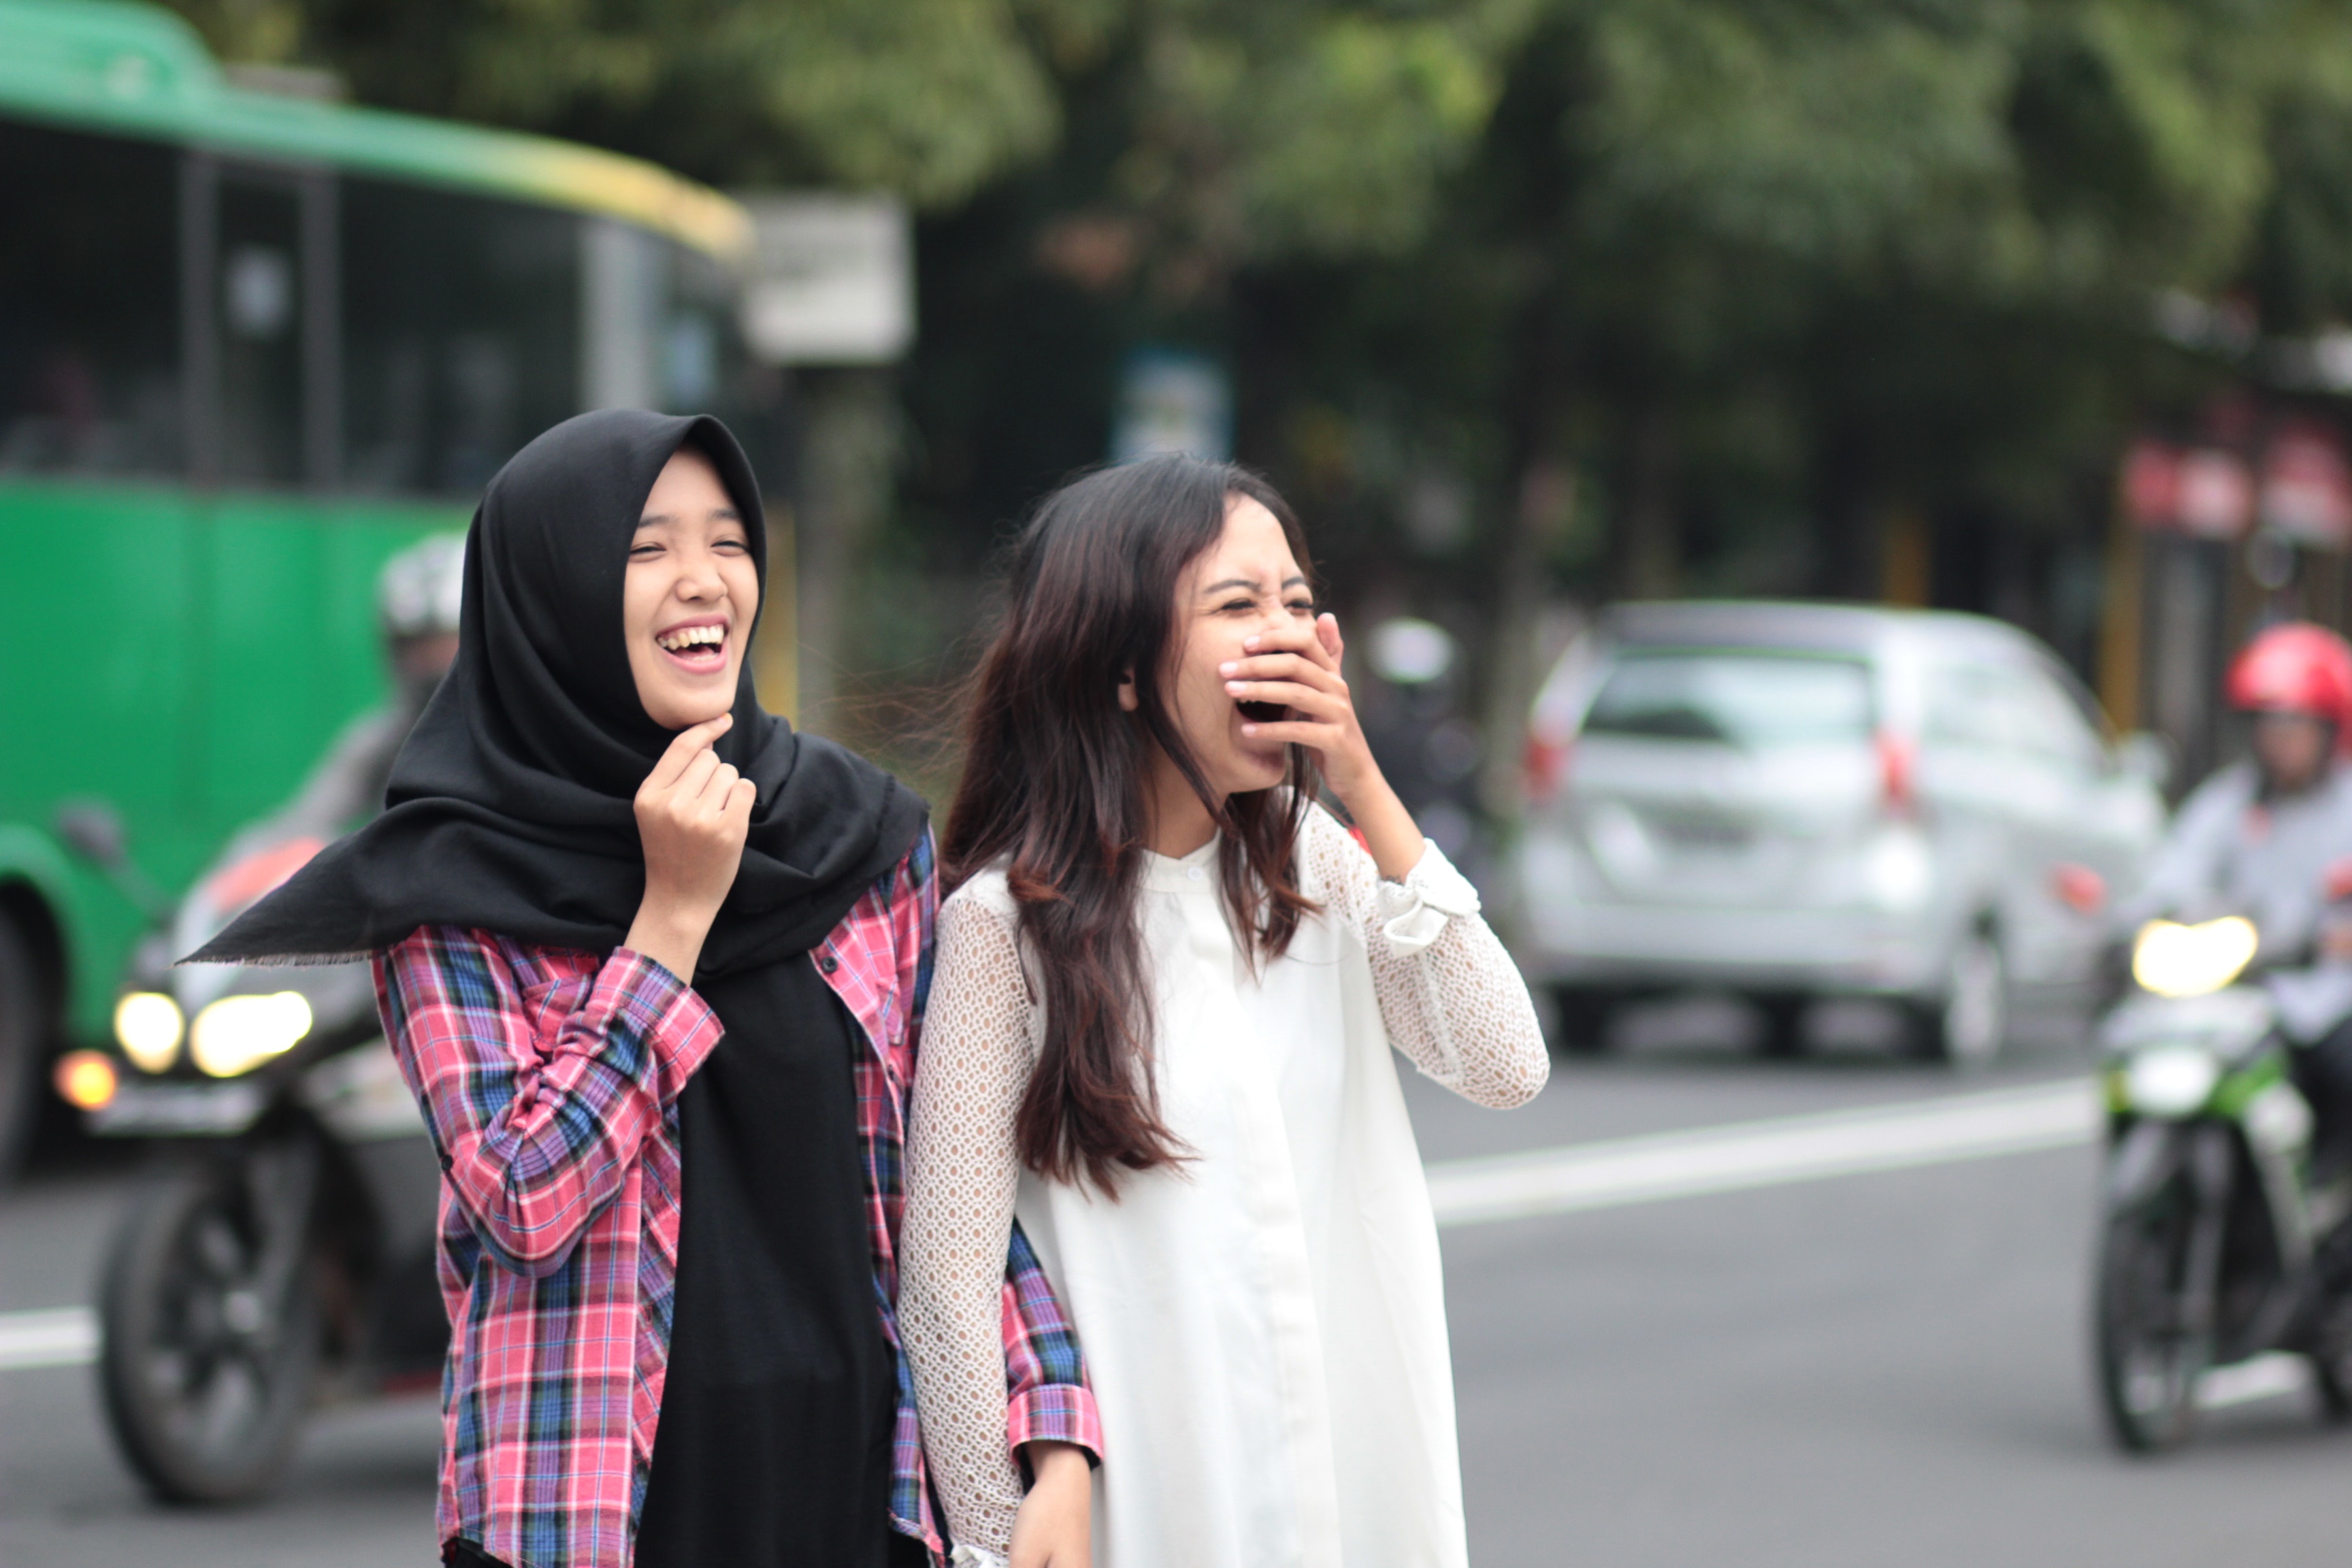 Two women laughing at street photo